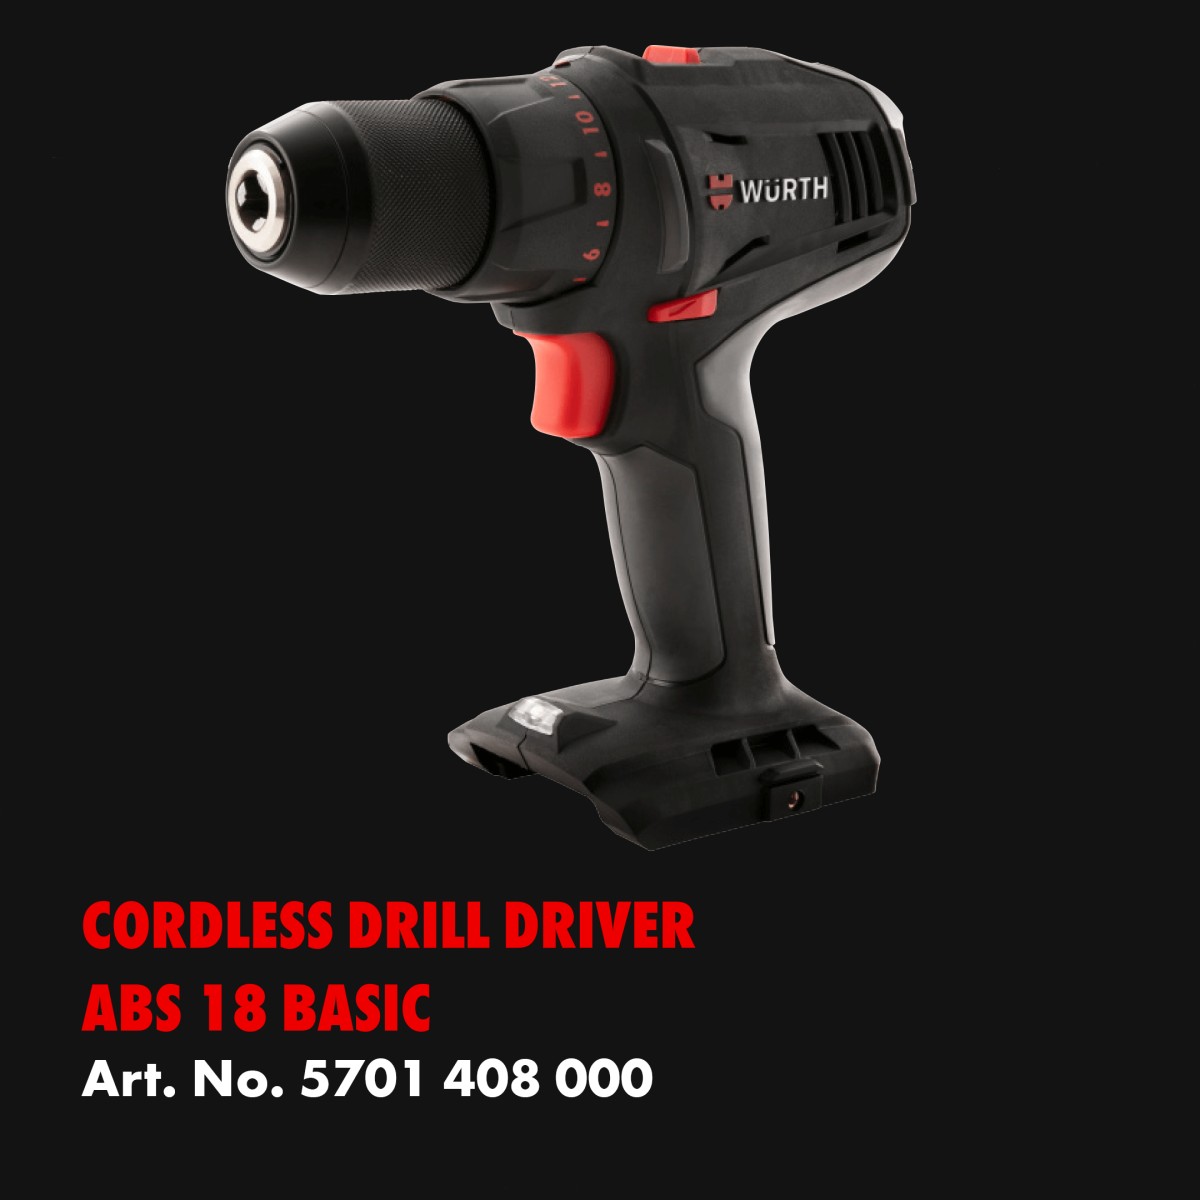 Cordless Drill Driver ABS-18 Basic